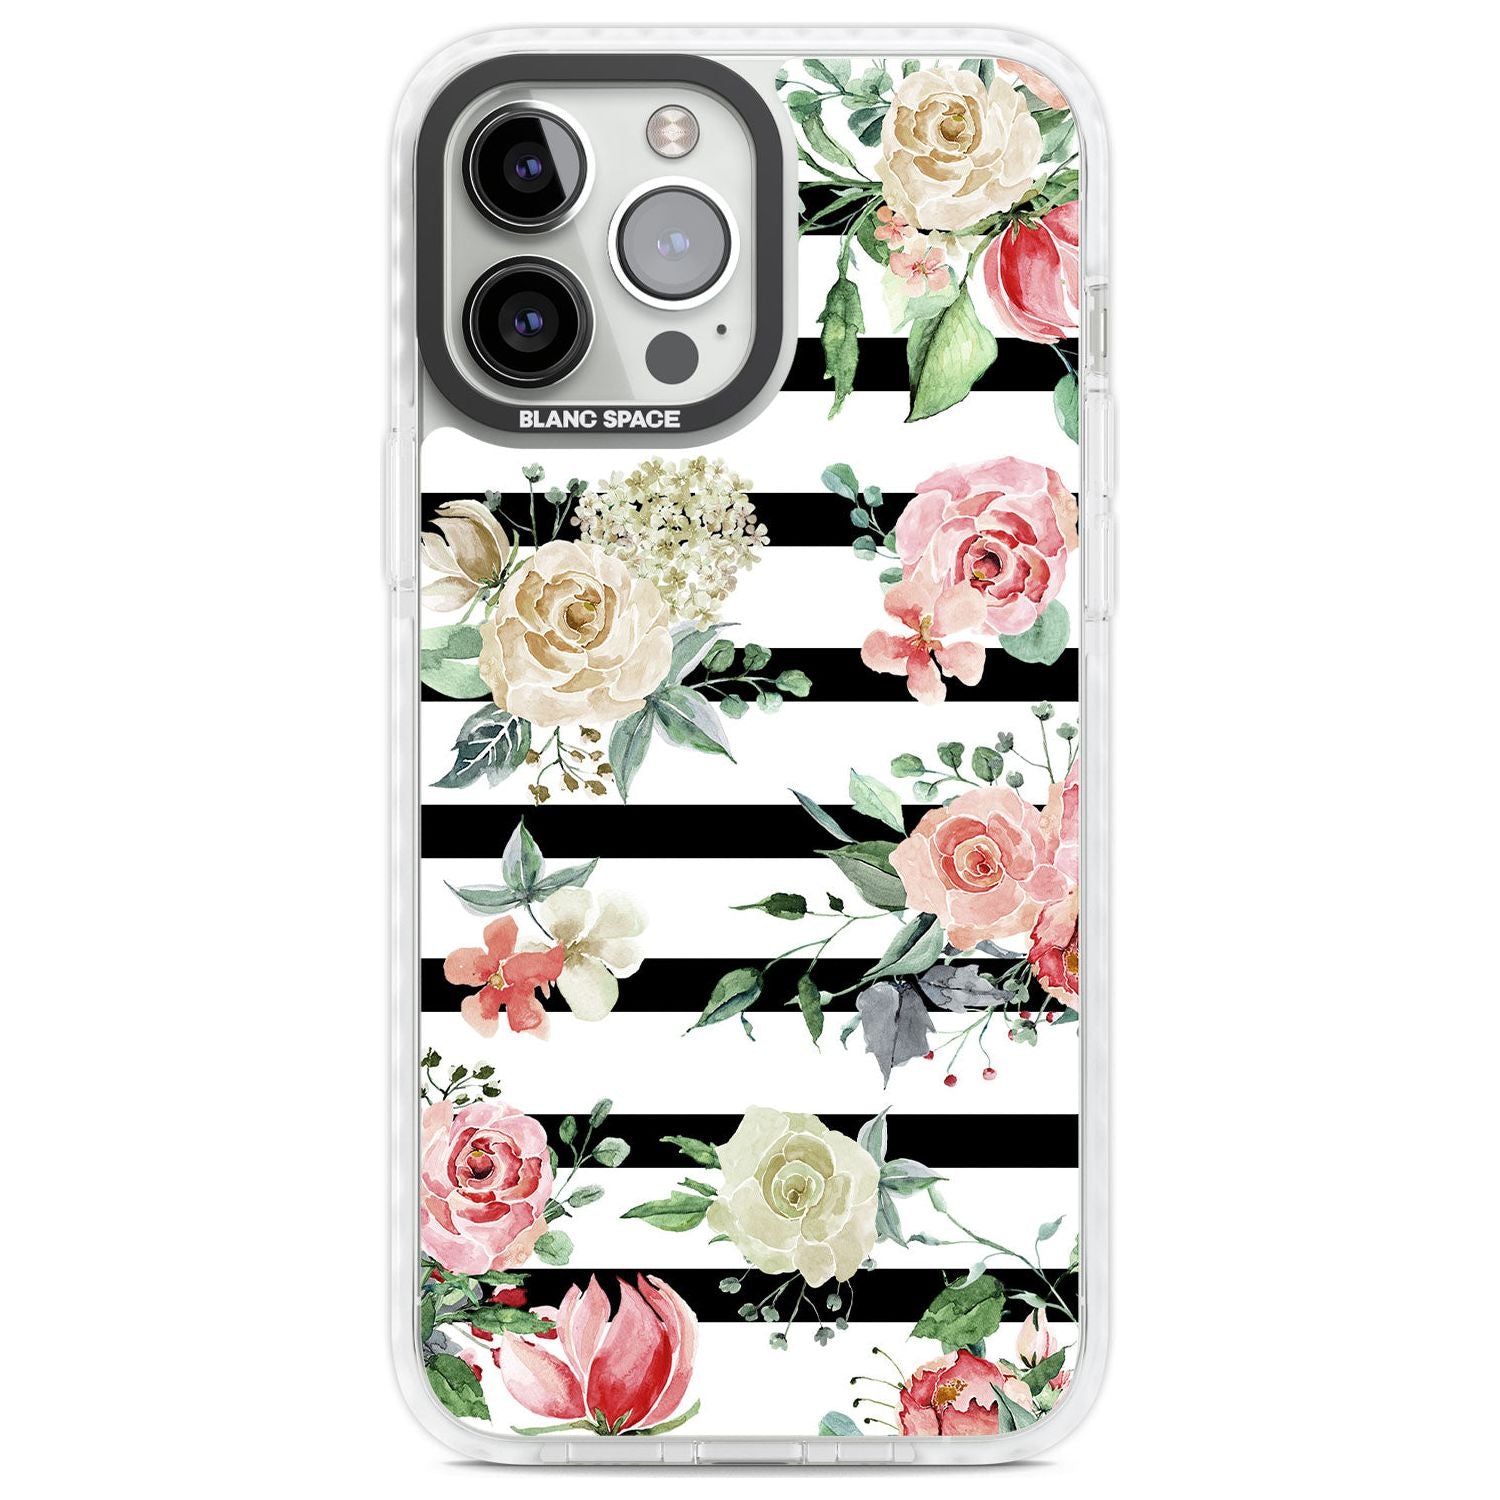 Bold Stripes & Flower Pattern Phone Case iPhone 13 Pro Max / Impact Case,iPhone 14 Pro Max / Impact Case Blanc Space